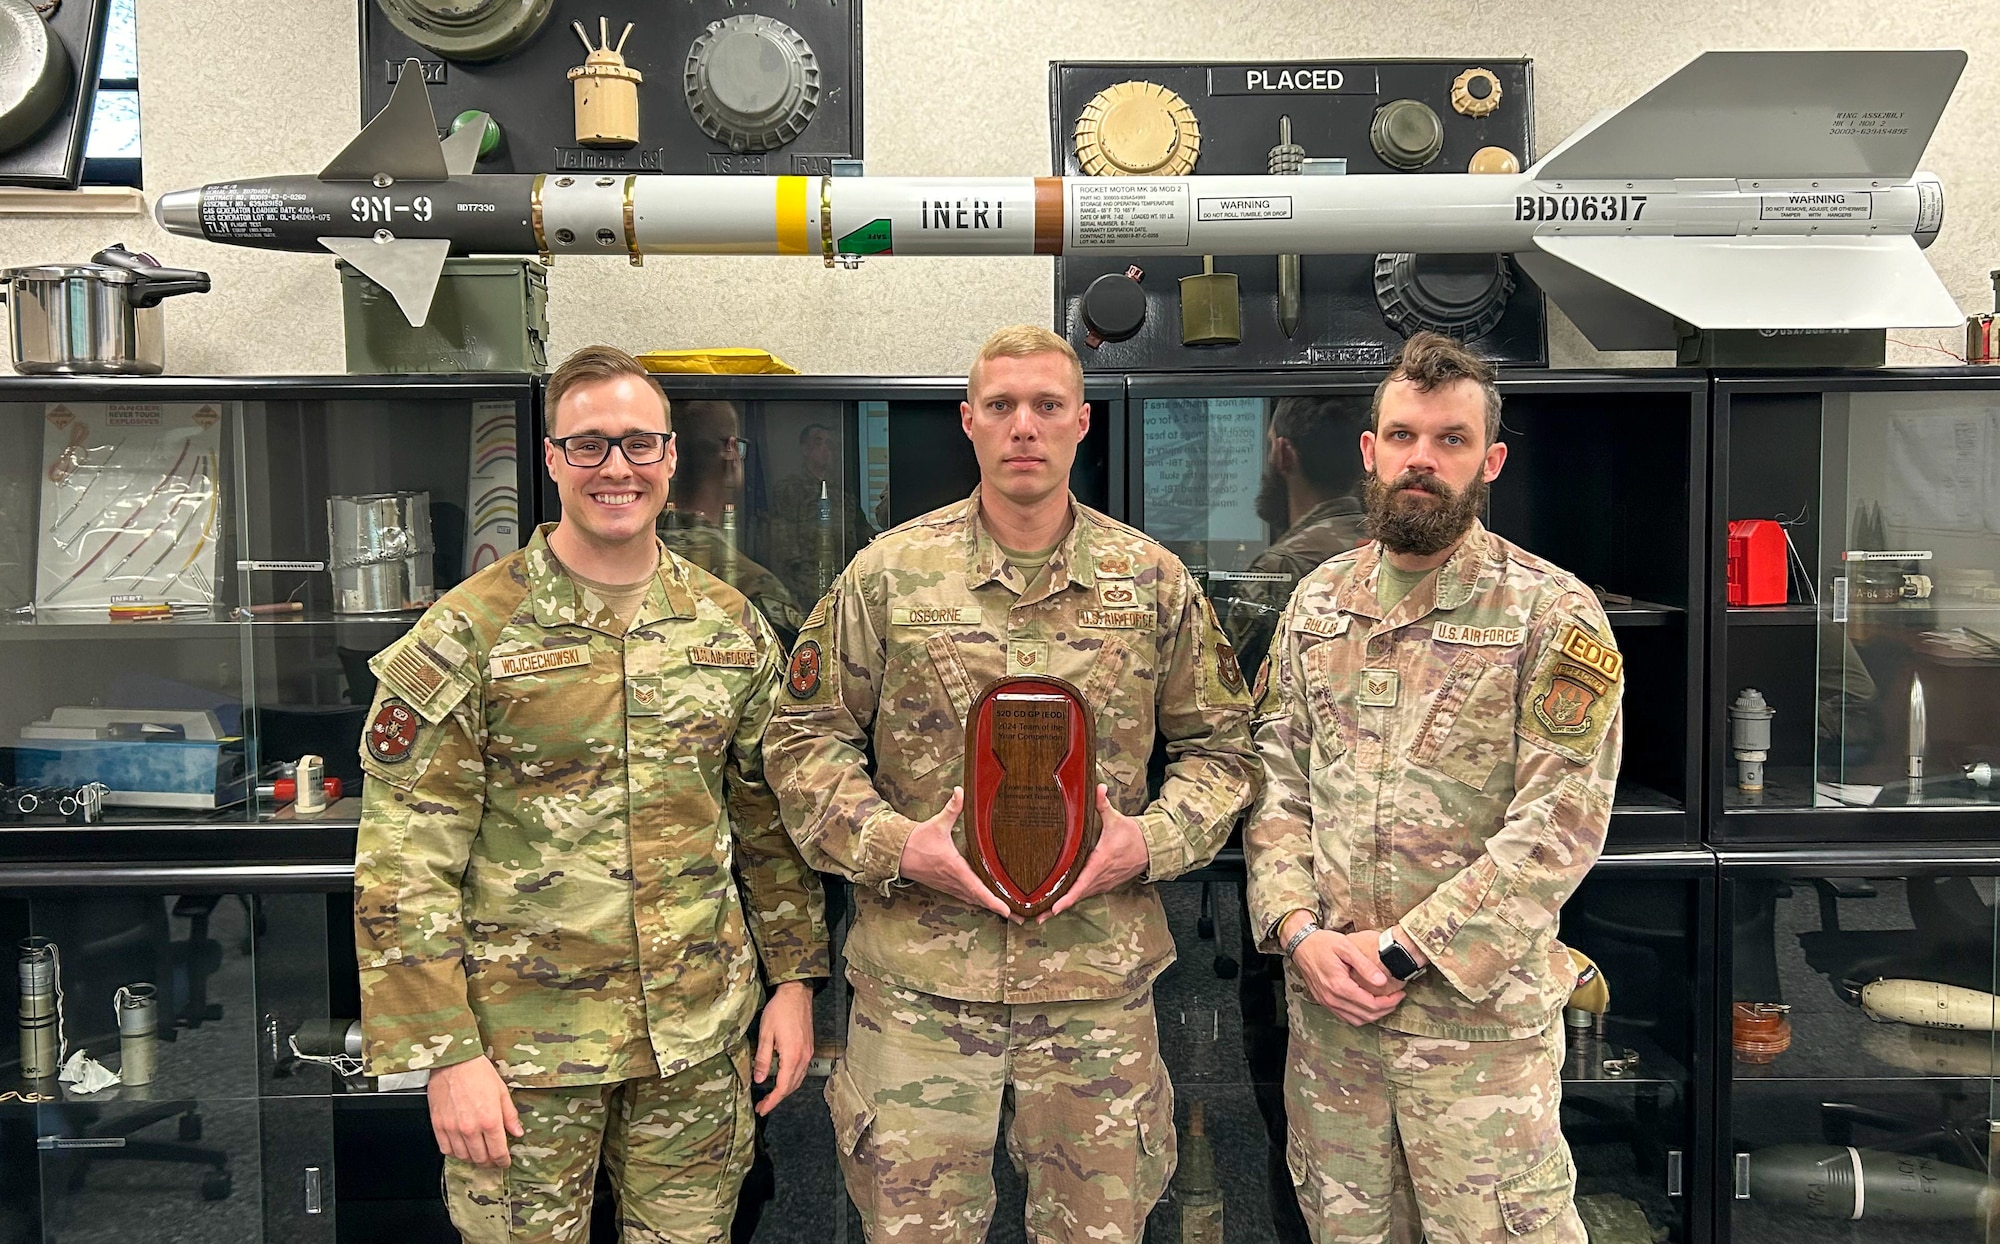 Staff Sgt. Stephan Wojciechowski, Tech. Sgt. David Osborne Jr. and Staff Sgt. Rockwood Bullard, all reservists assigned to the 434th Civil Engineer Squadron, Grissom Air Reserve Base, Ind., pose for a photo with their plaque, March 27, 2024. The trio received the plaque for placing third in the U.S. Army’s 52nd Ordnance Group Team of the Year competition held at Fort Campbell, Ky., March 11-15, 2024. (U.S. Air Force photo by Senior Airman Alexis Morris)